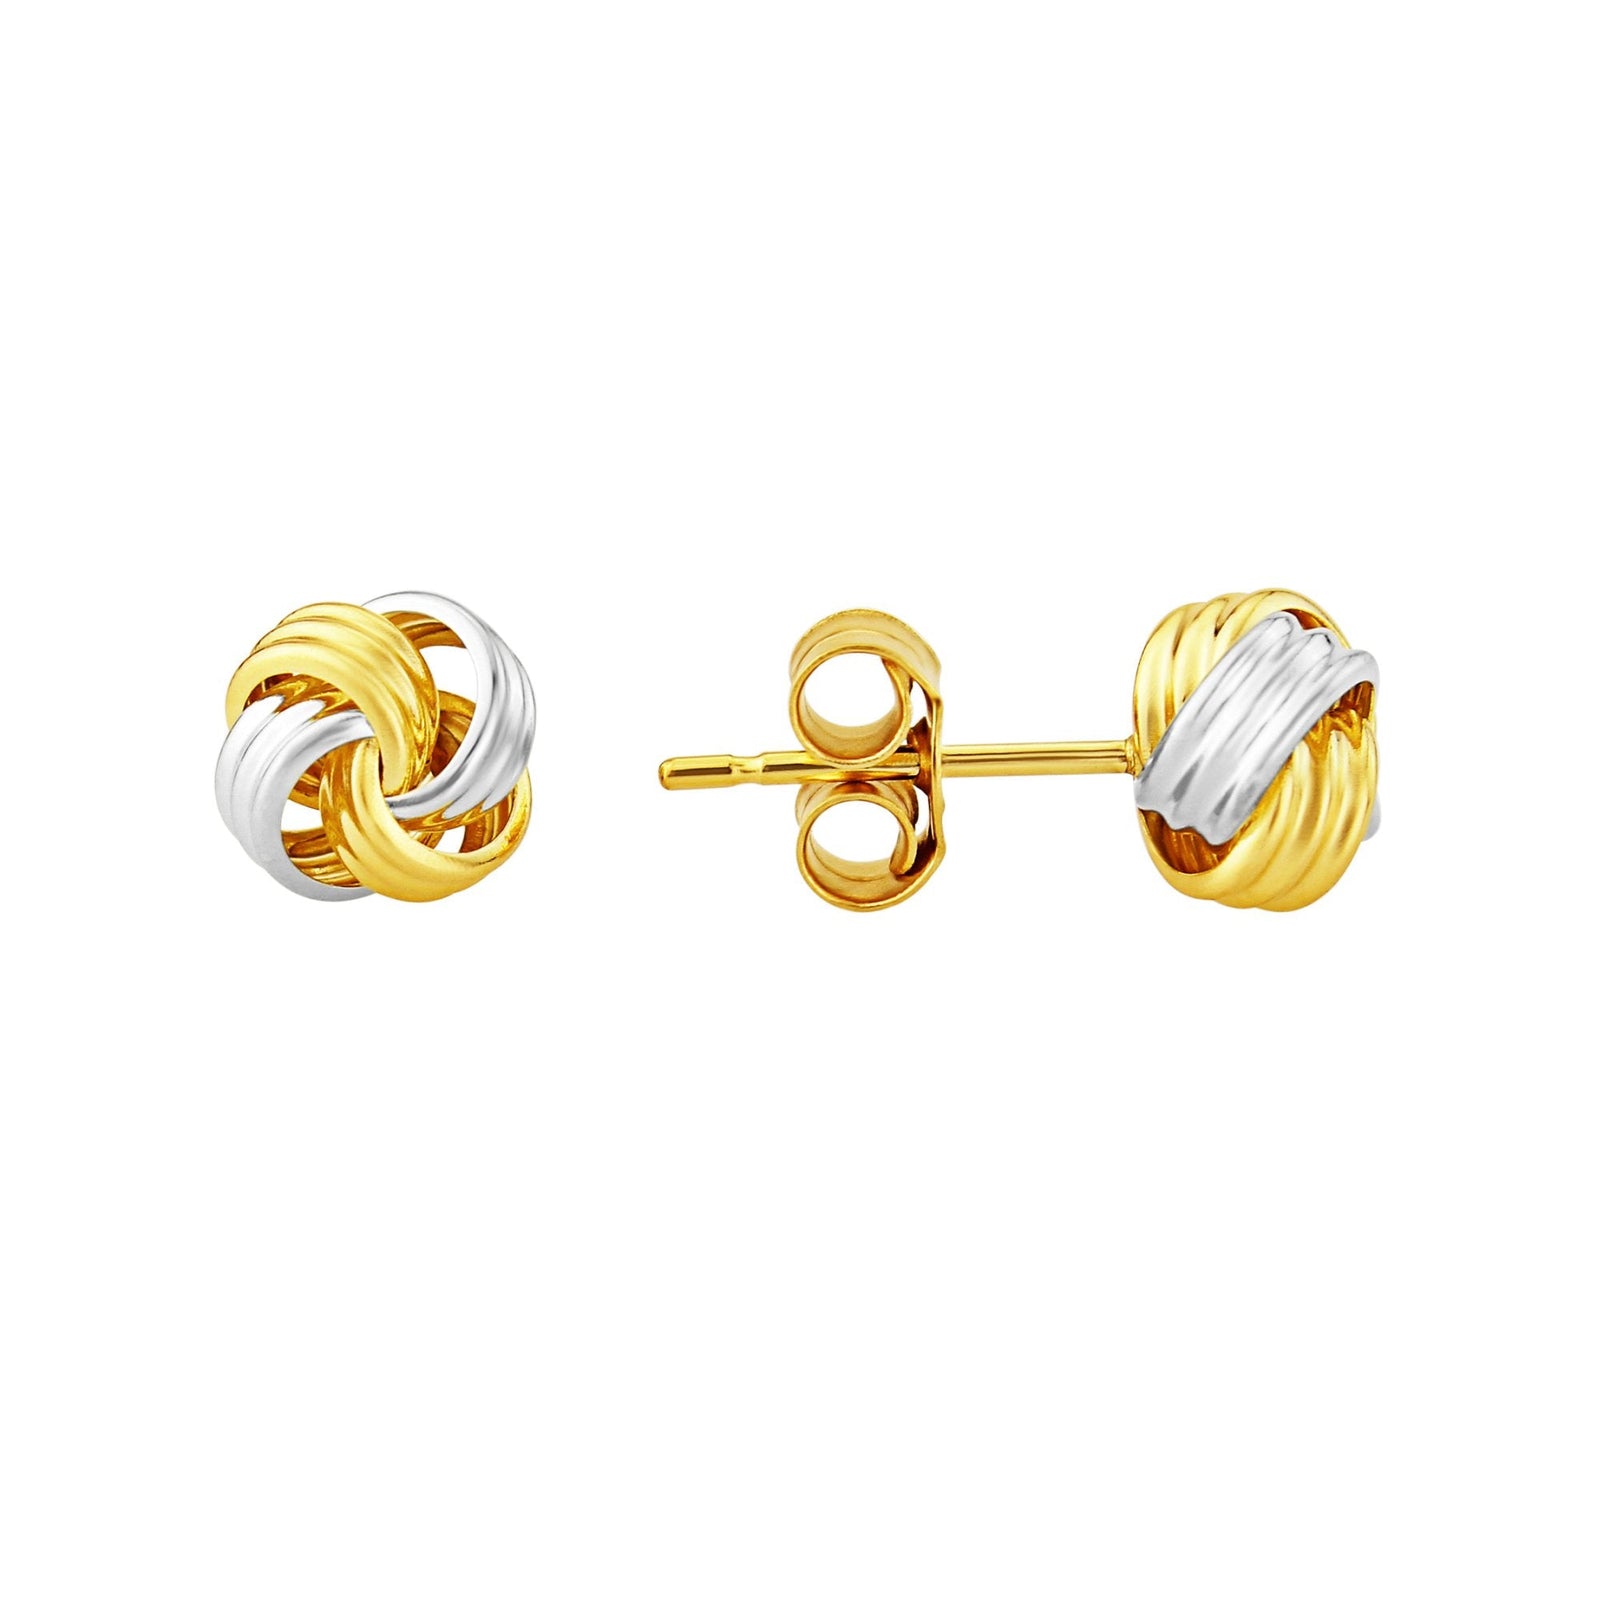 9ct y/w gold 3 strand knot stud earrings